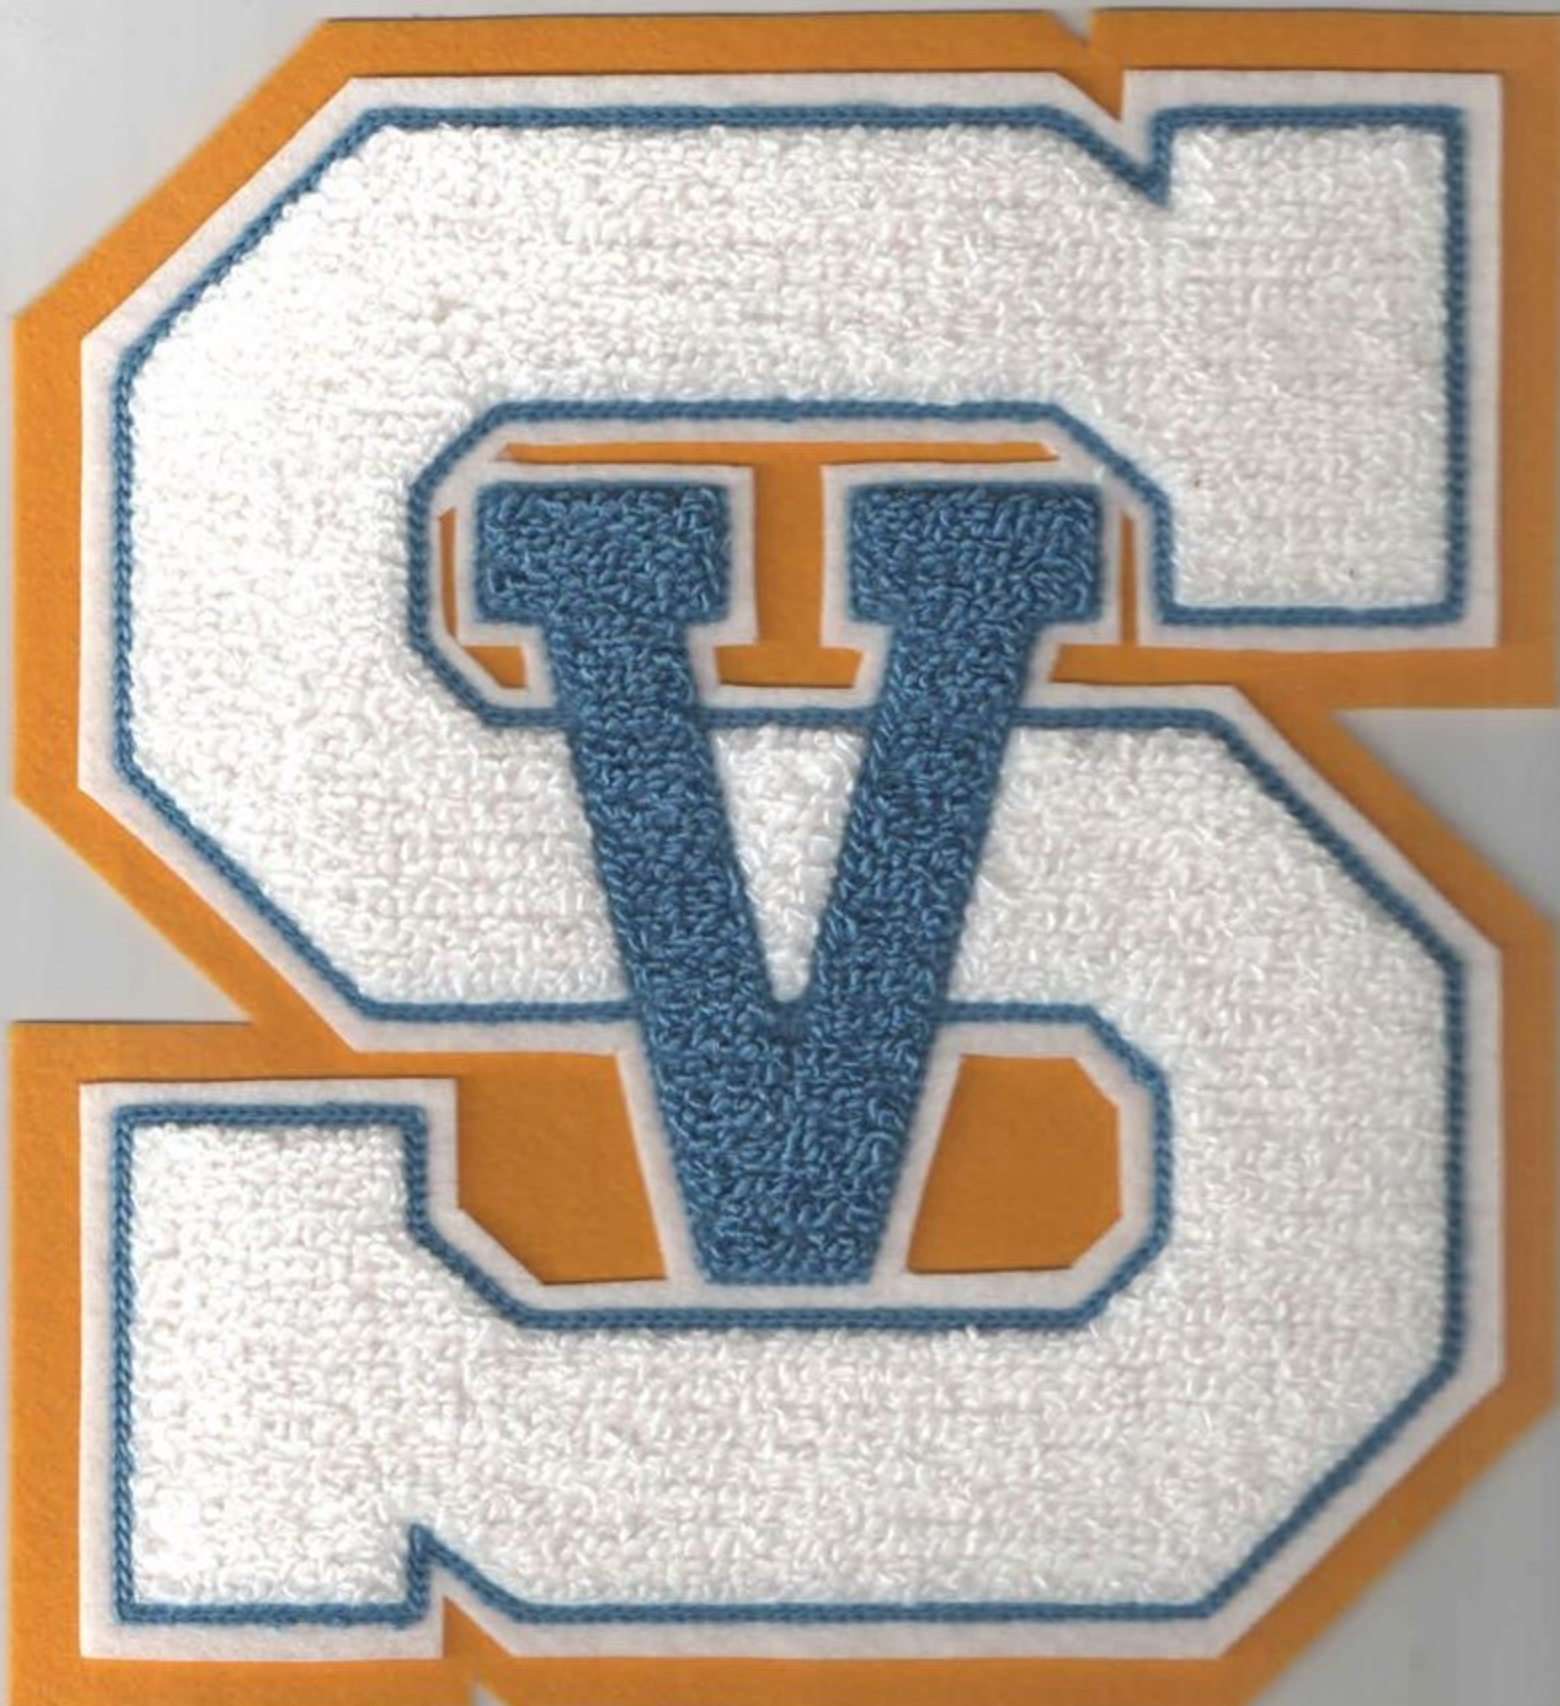 High School Letter Patch